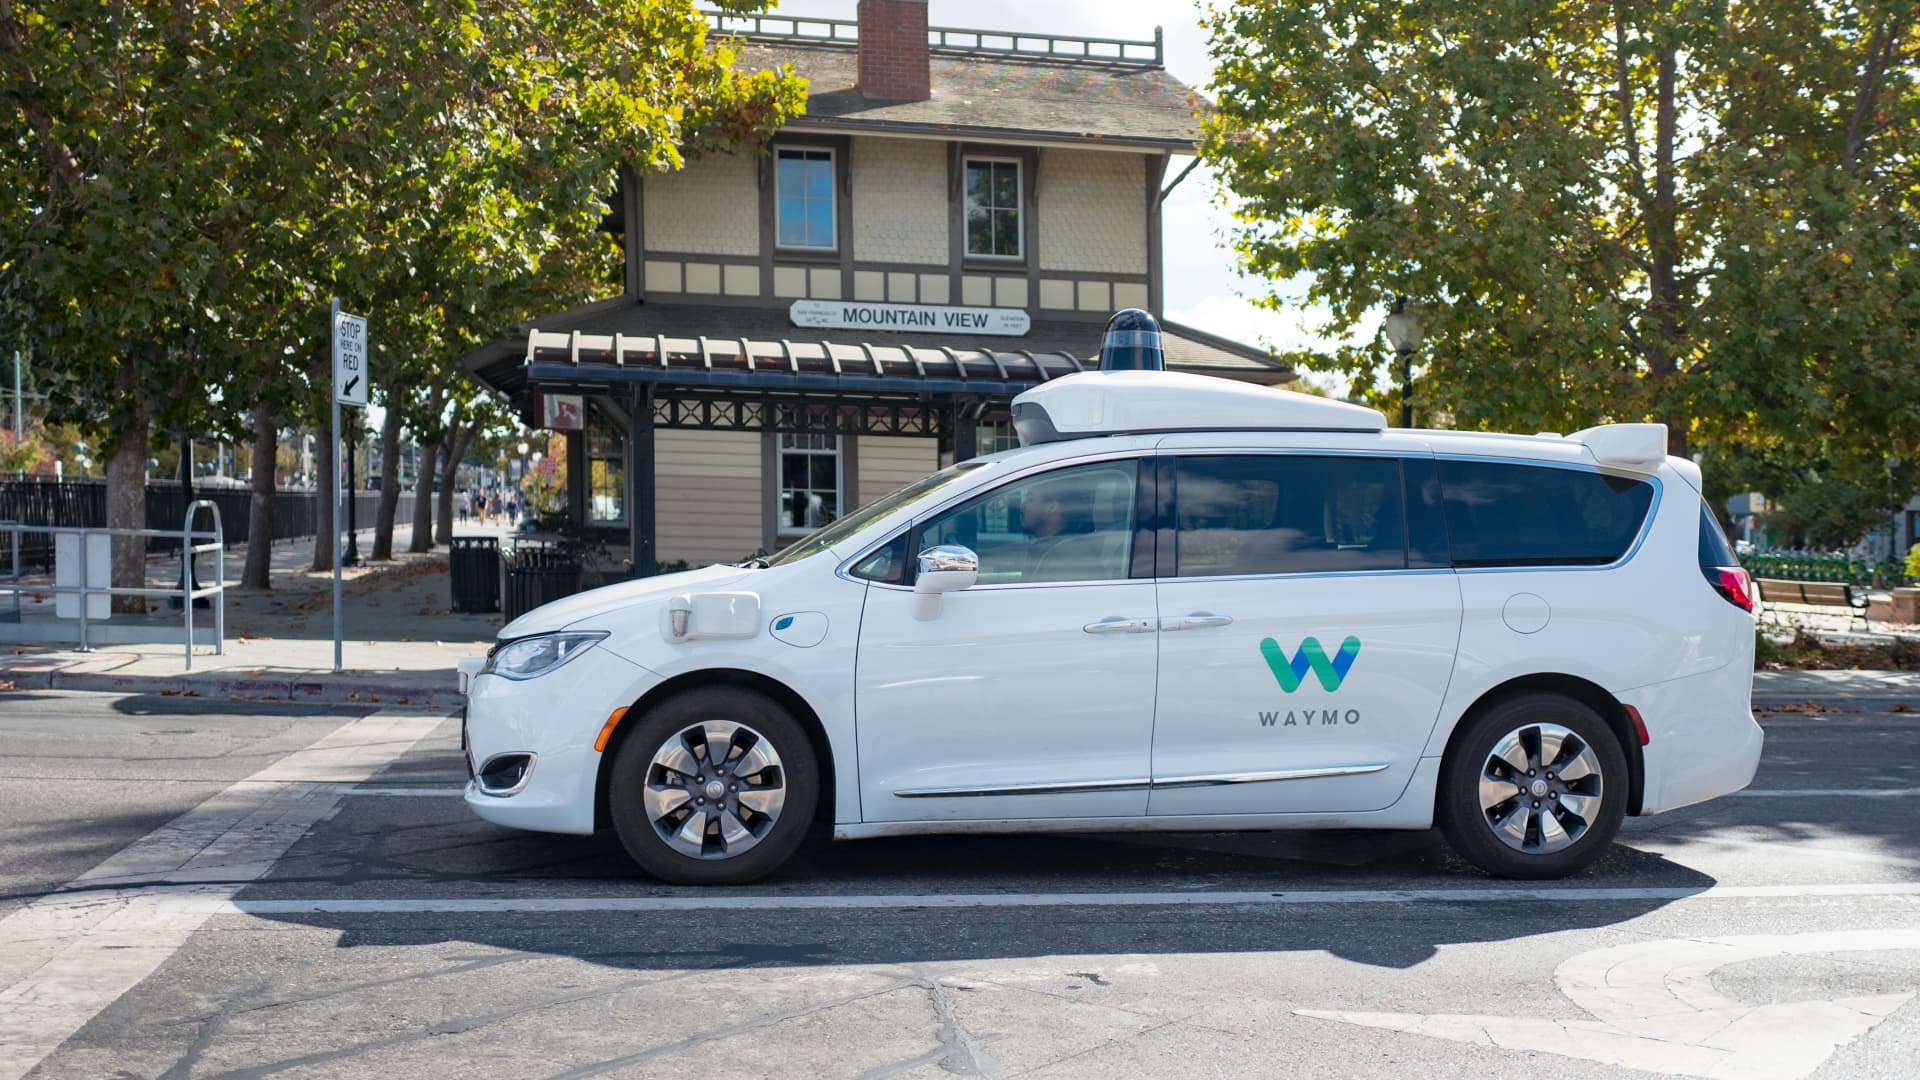 Close-up of self driving minivan, with LIDAR and other sensor units and logo visible, part of Google parent company Alphabet Inc, driving past historic railroad station with sign reading Mountain View, in the Silicon Valley town of Mountain View, California, with safety driver visible, October 28, 2018.